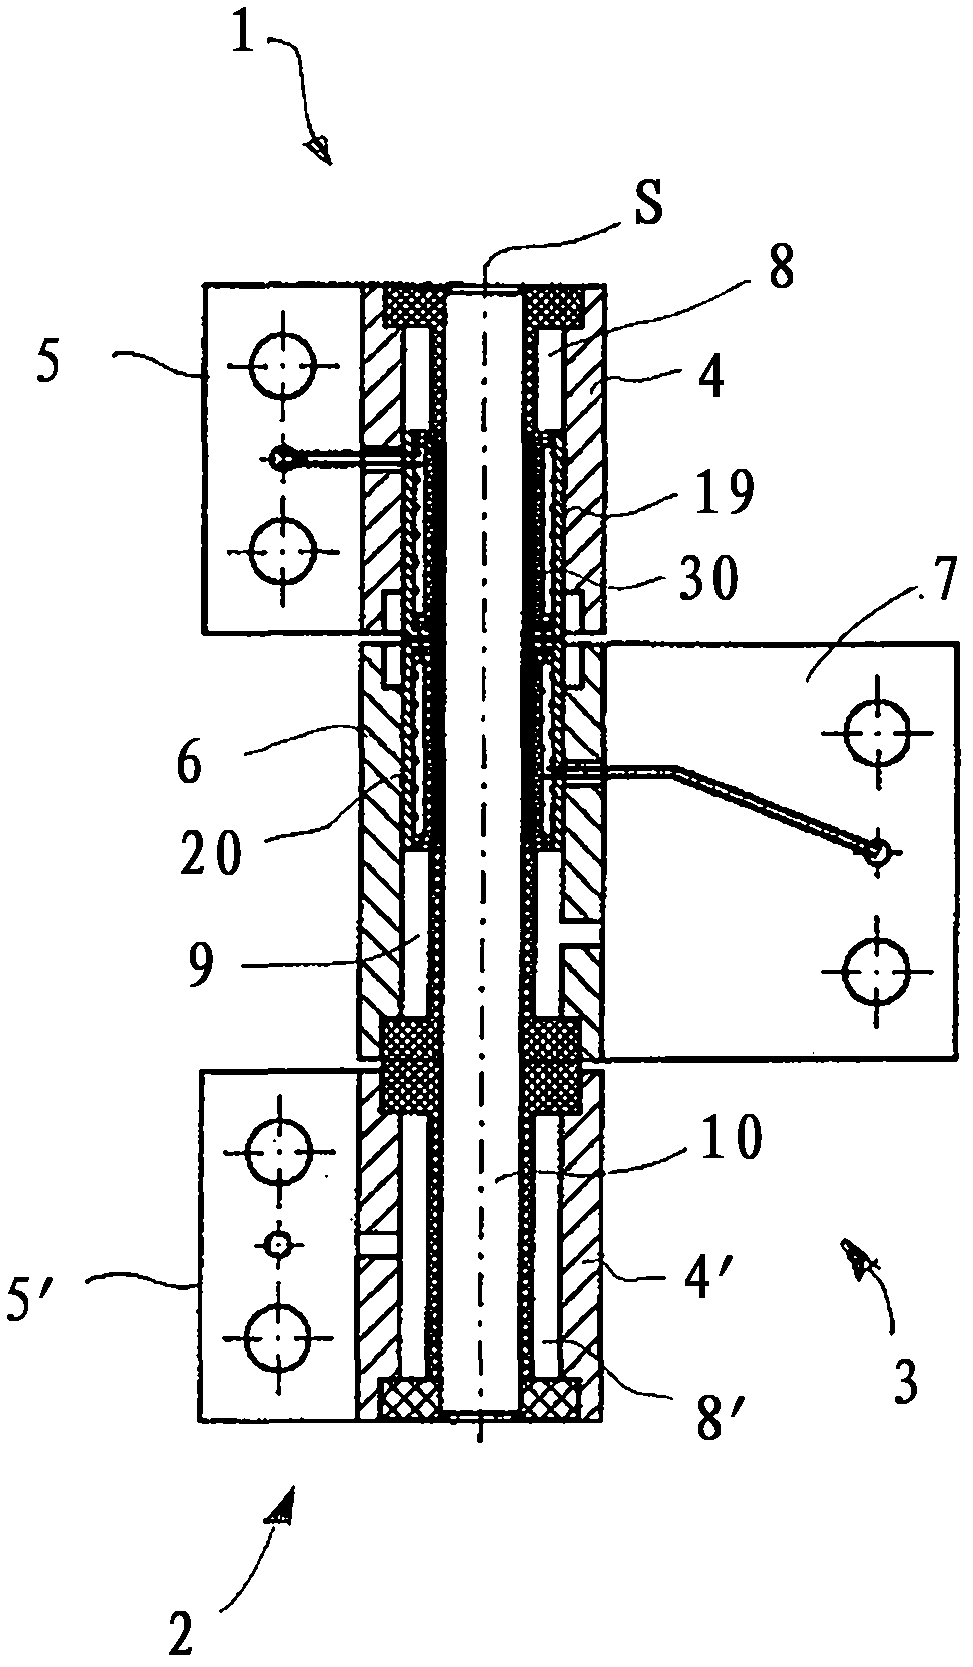 Hinge for connecting a leaf to a frame so as to be hinged about a hinge axis